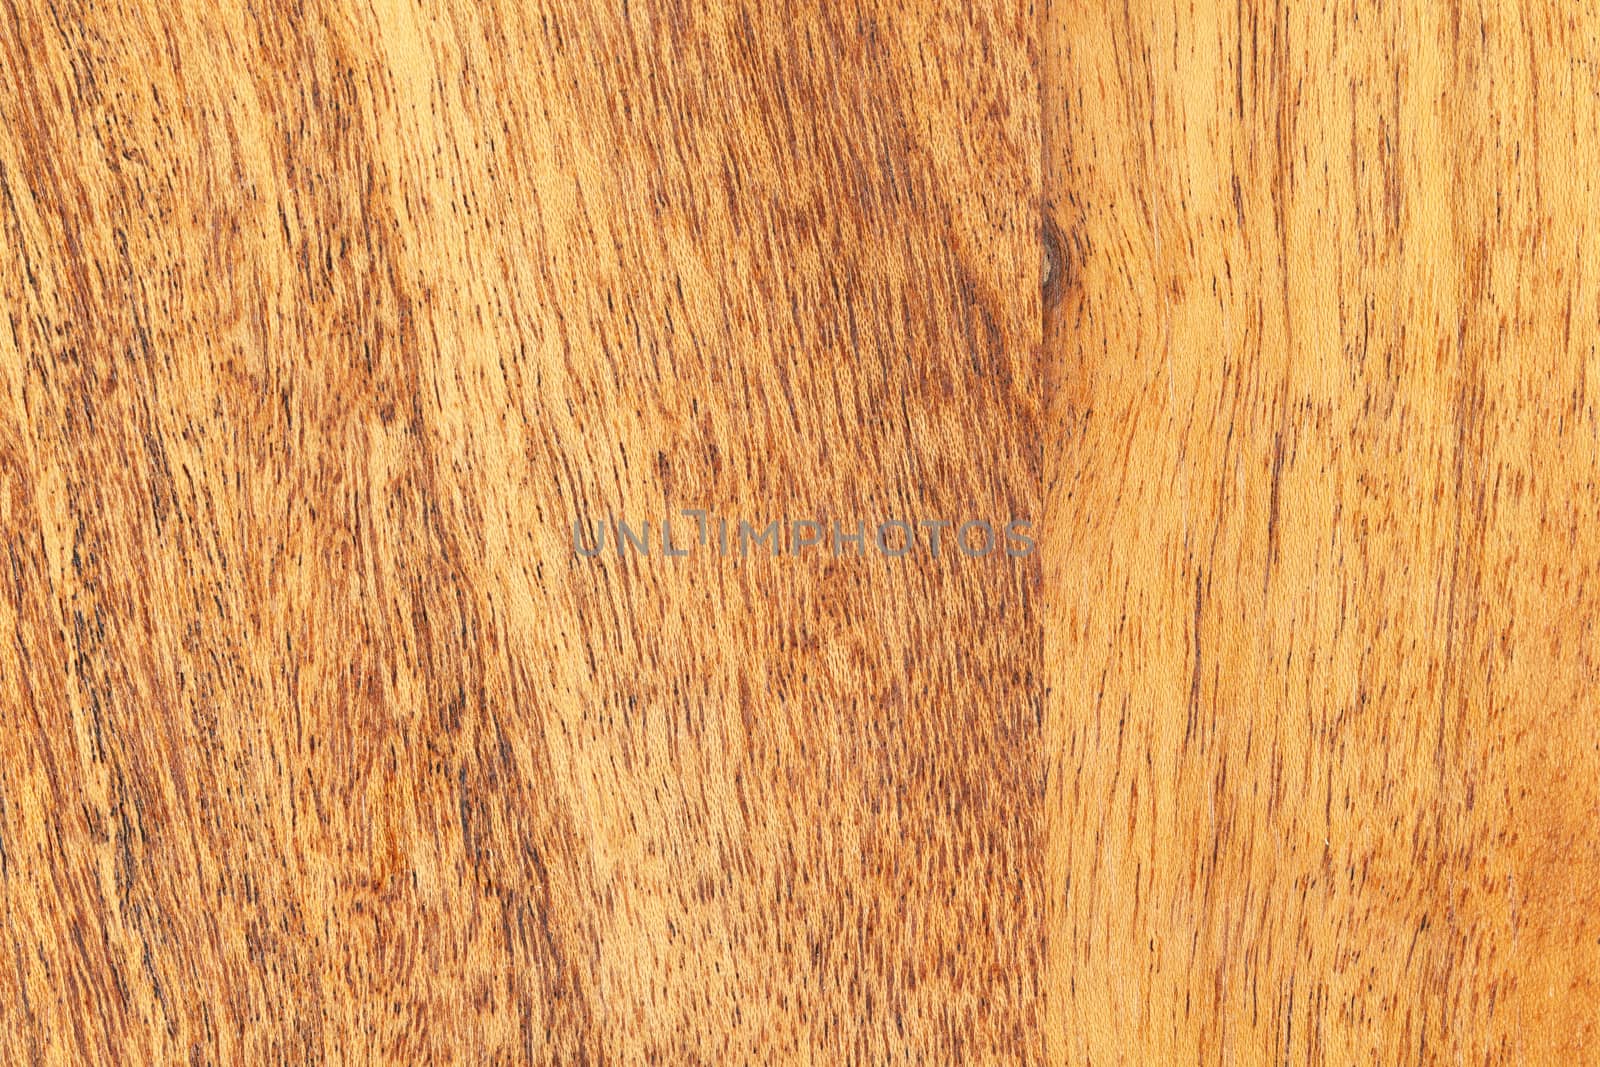 Natural acacia wood texture, wooden cut background. Zero waste, eco-friendly, no plastic, go green, plastic free, environmental conservation, sustainable lifestyle concept. Copy space. Horizontal.